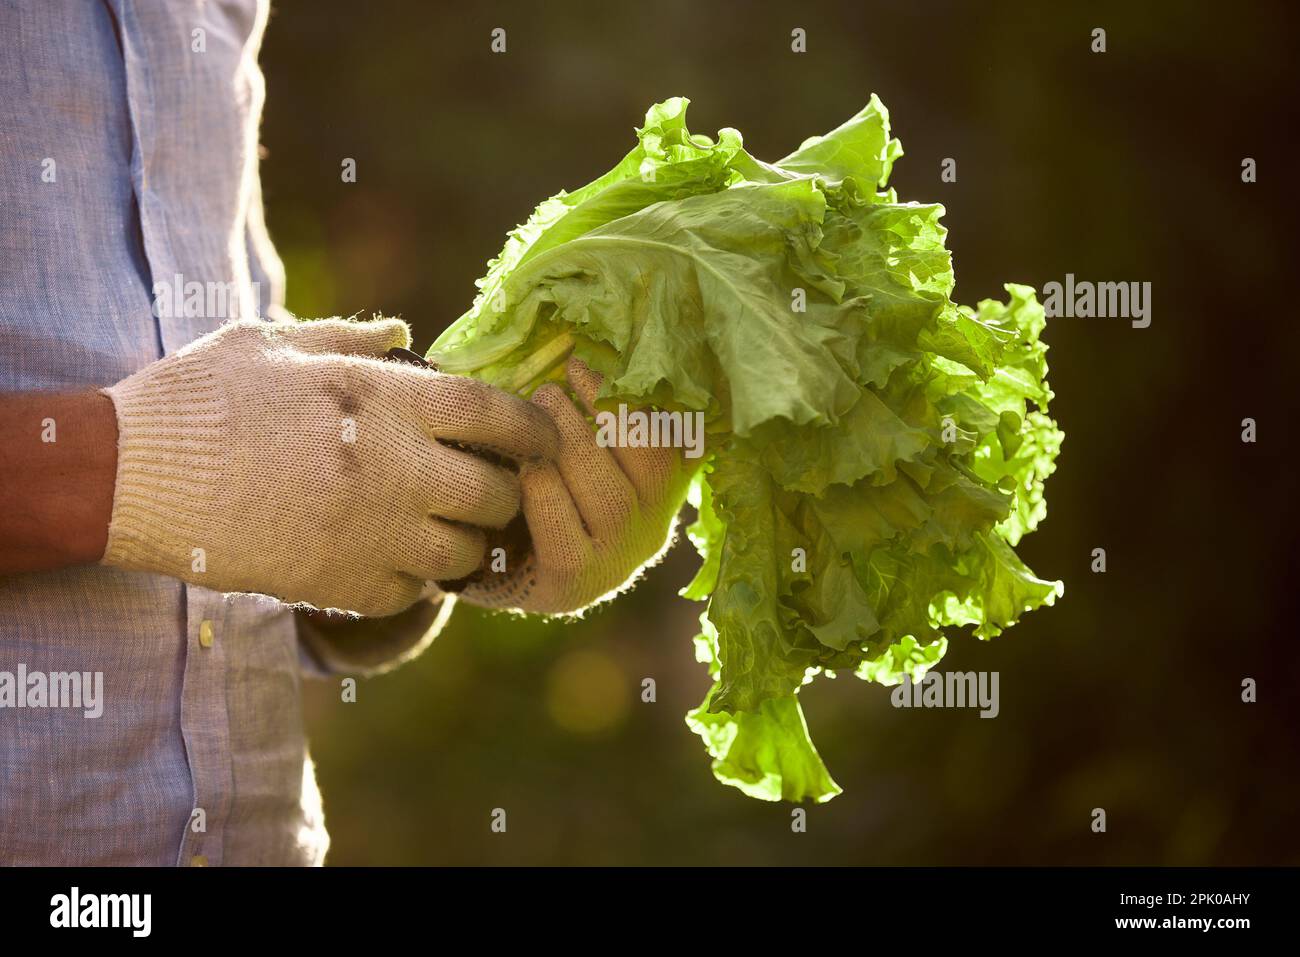 The farmer is holding a bunch of green fresh lettuce in the sun, fresh lettuce from his vegetable garden, growing lettuce vegetables and fruits in his Stock Photo